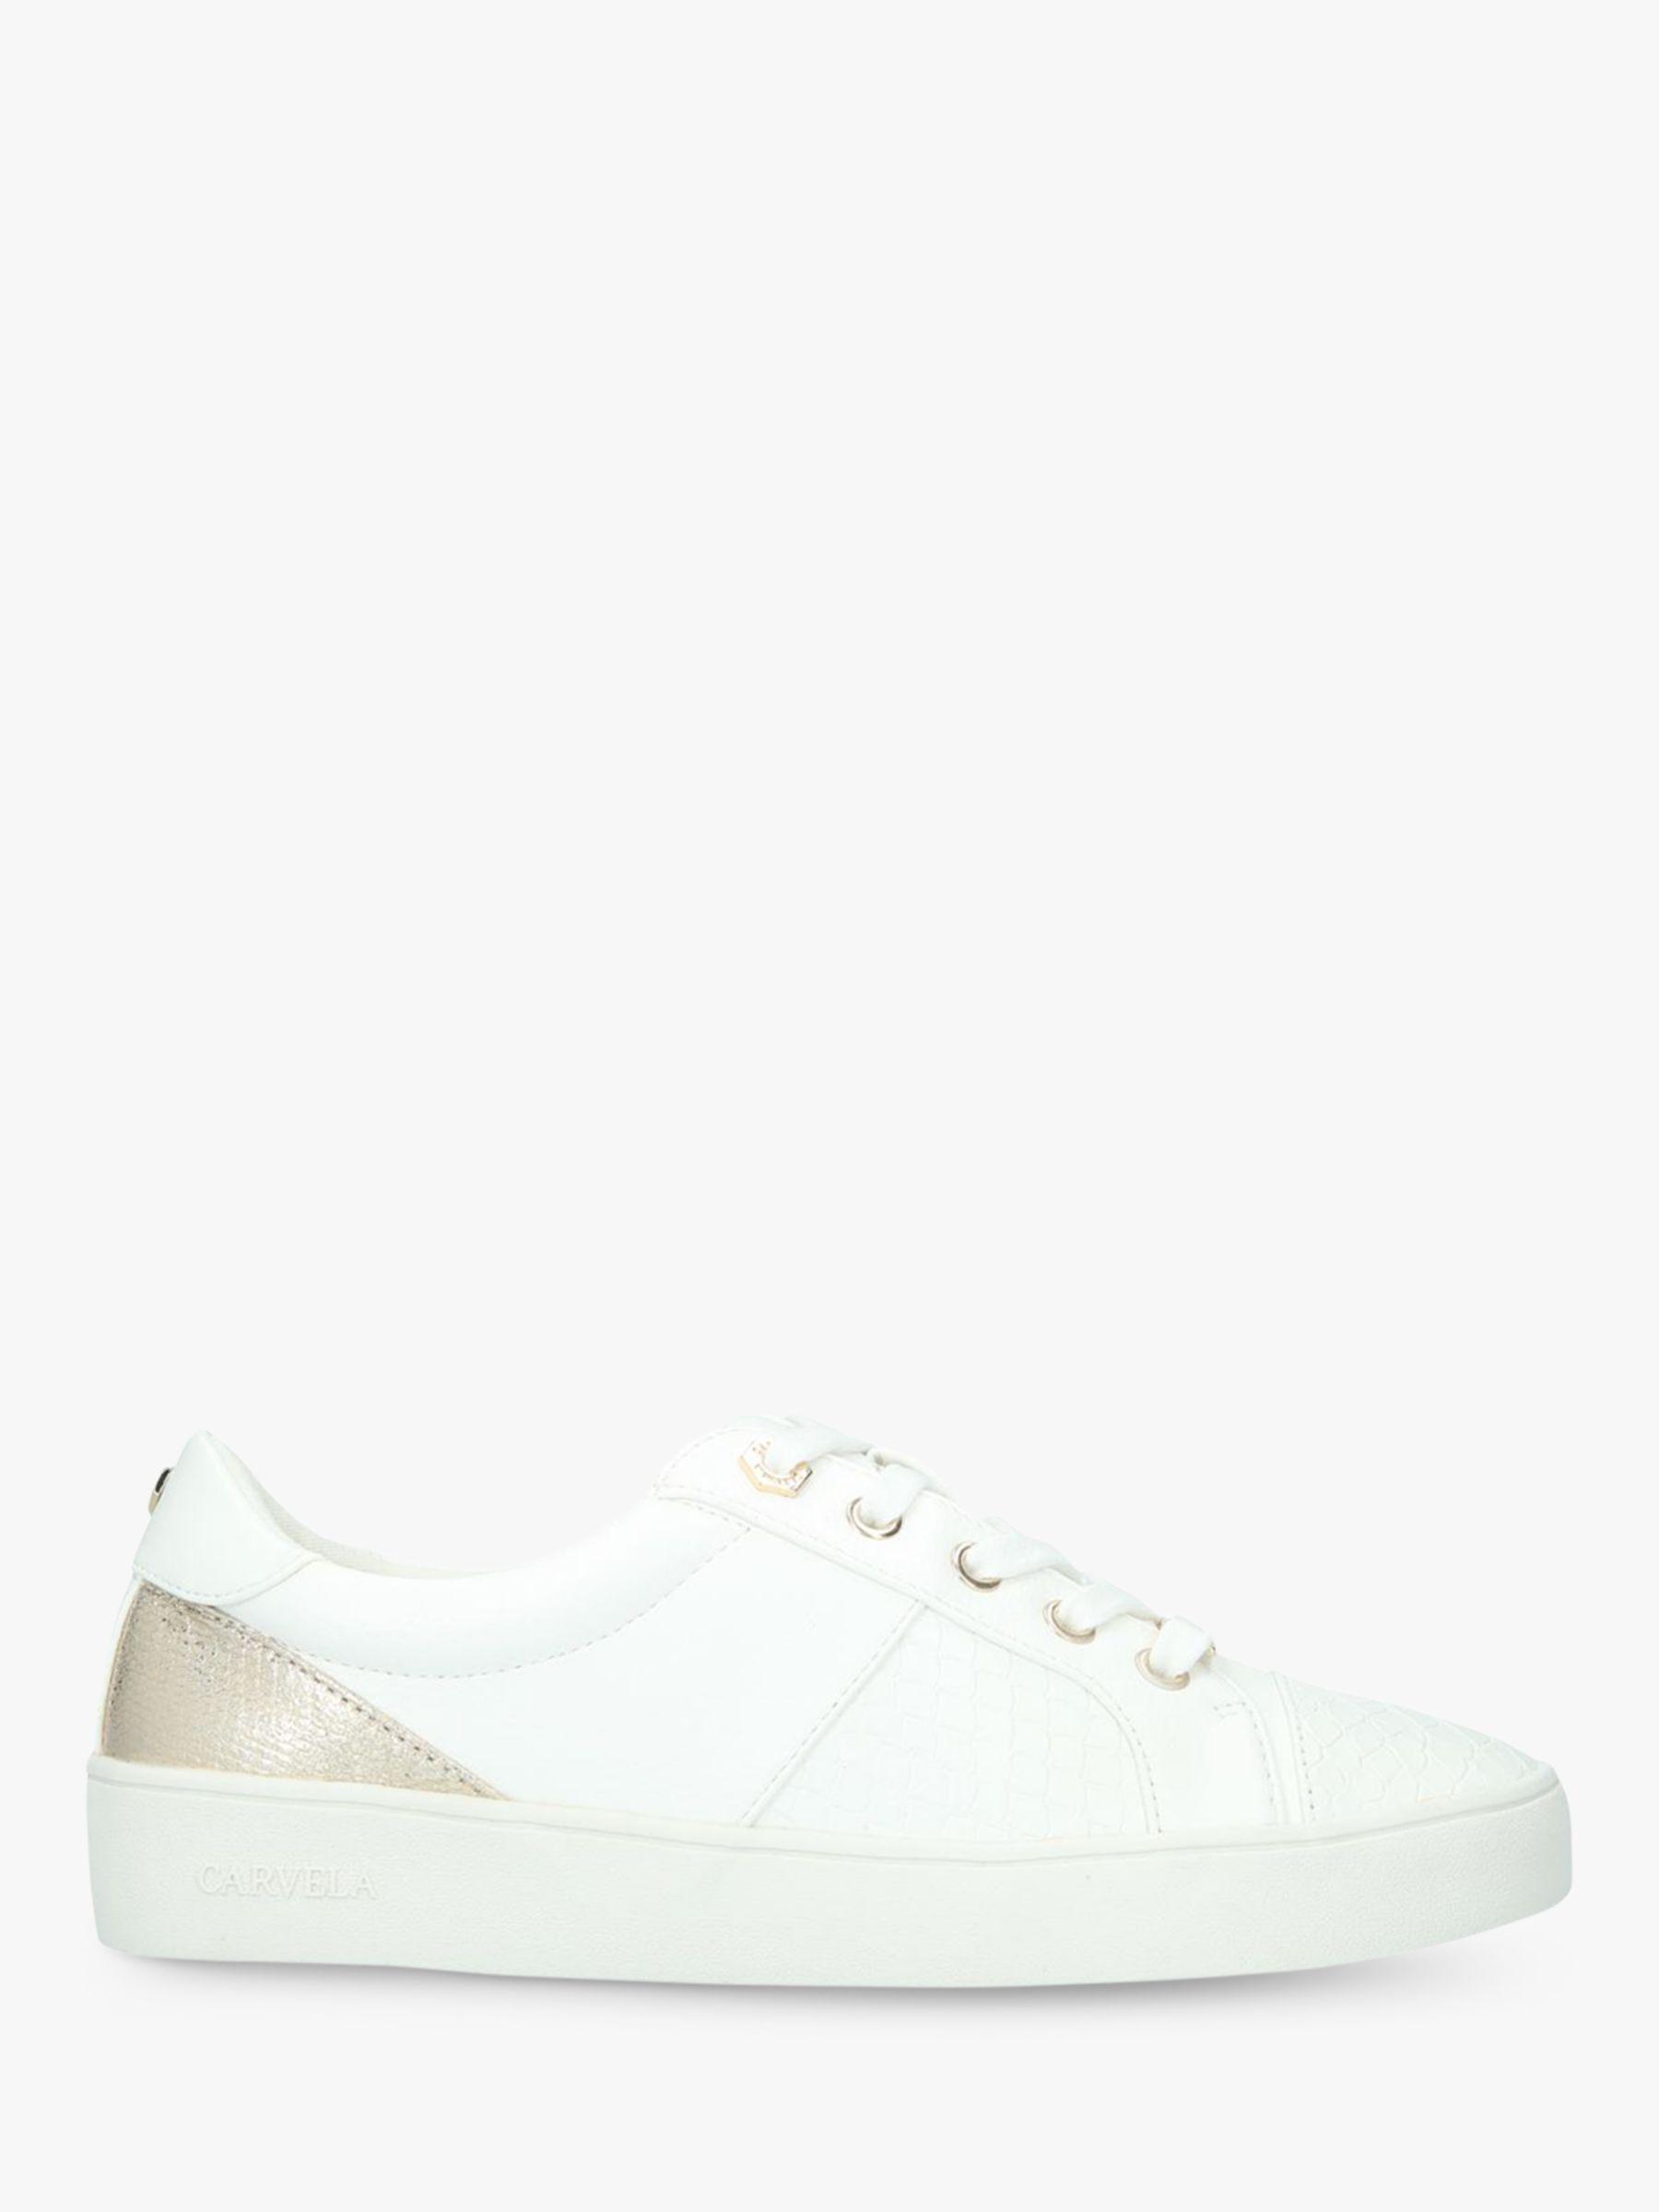 Carvela Kurt Geiger Synthetic Jagger Snake-embossed Trainers in White ...